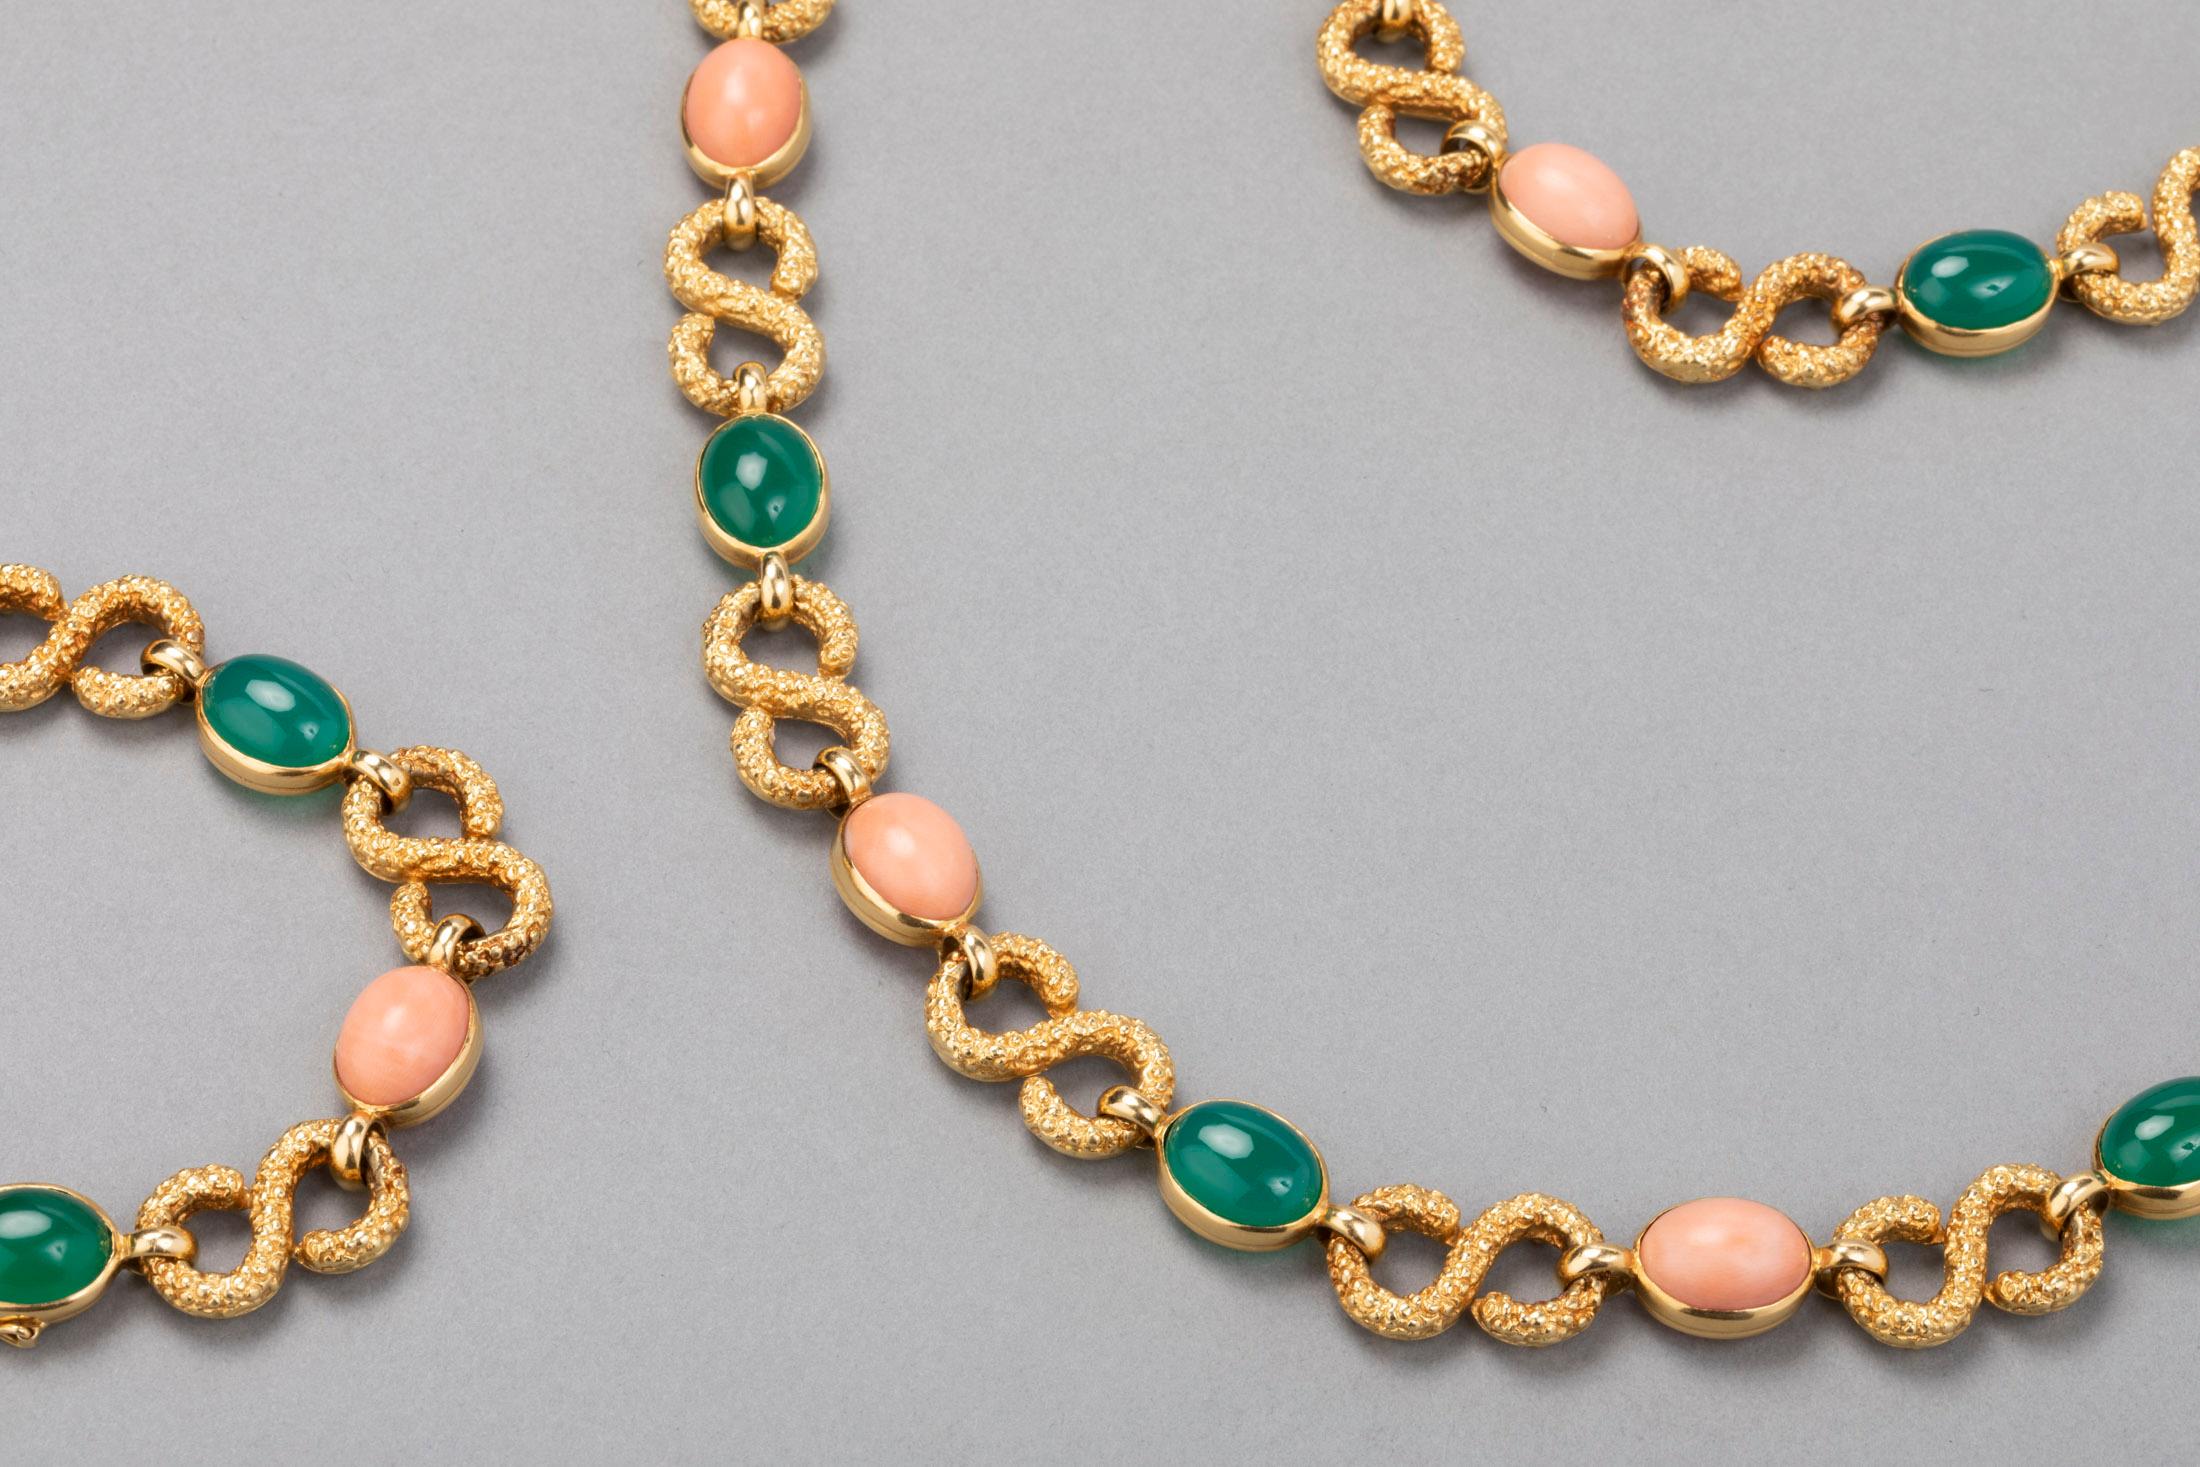 Women's French Gold Coral and Agate Necklace and Bracelet Set